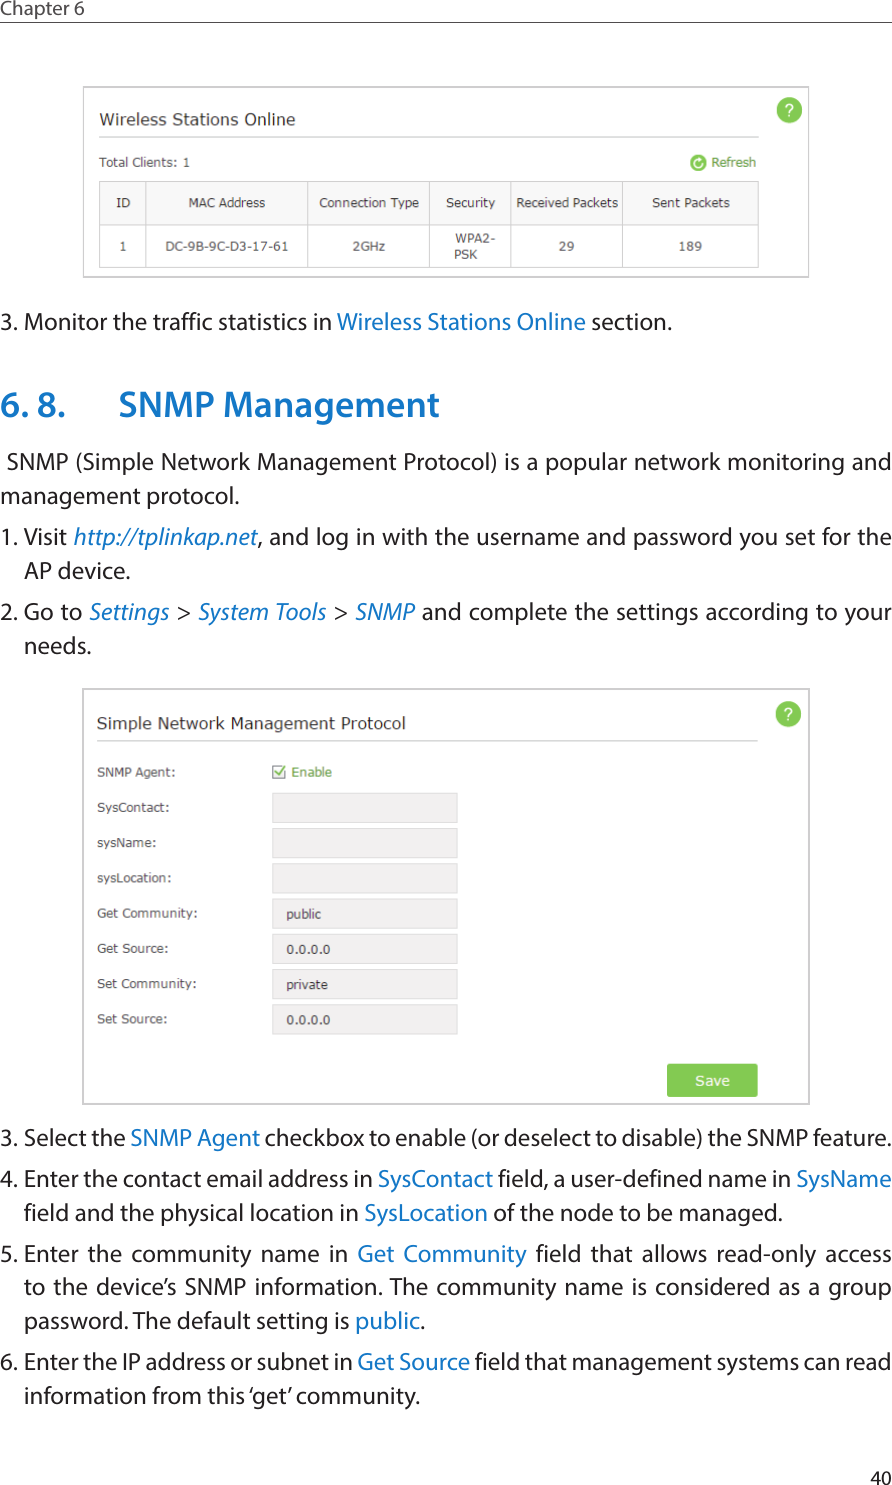 40Chapter 6  3. Monitor the traffic statistics in Wireless Stations Online section.6. 8.  SNMP Management SNMP (Simple Network Management Protocol) is a popular network monitoring and management protocol.1. Visit http://tplinkap.net, and log in with the username and password you set for the AP device.2. Go to Settings &gt; System Tools &gt; SNMP and complete the settings according to your needs.3. Select the SNMP Agent checkbox to enable (or deselect to disable) the SNMP feature.4. Enter the contact email address in SysContact field, a user-defined name in SysName field and the physical location in SysLocation of the node to be managed.5. Enter the community name in Get Community field that allows read-only access to the device’s SNMP information. The community name is considered as a group password. The default setting is public.6. Enter the IP address or subnet in Get Source field that management systems can read information from this ‘get’ community.